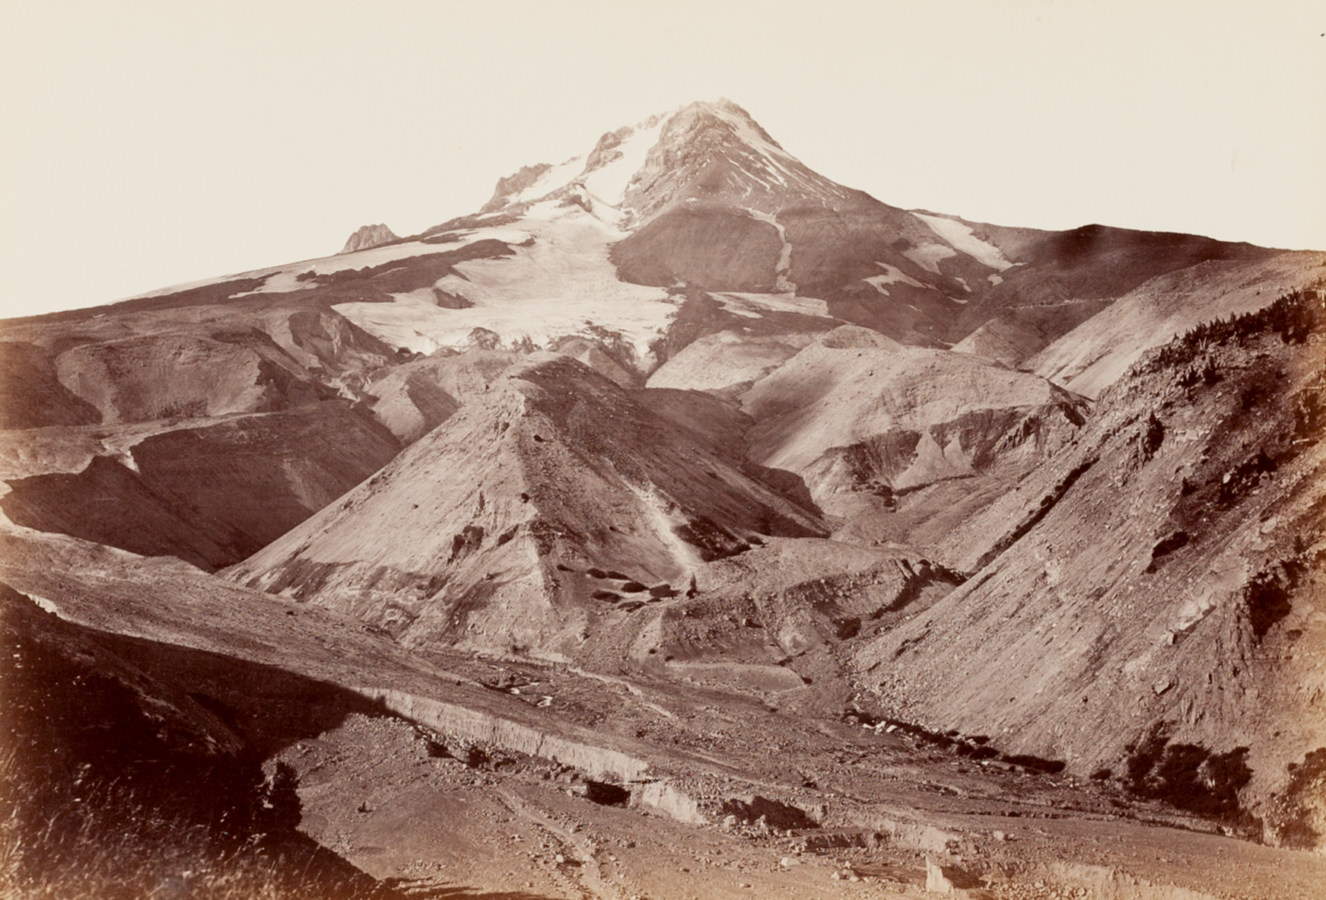 Ninteteenth century photograph of a snow-covered mountain top